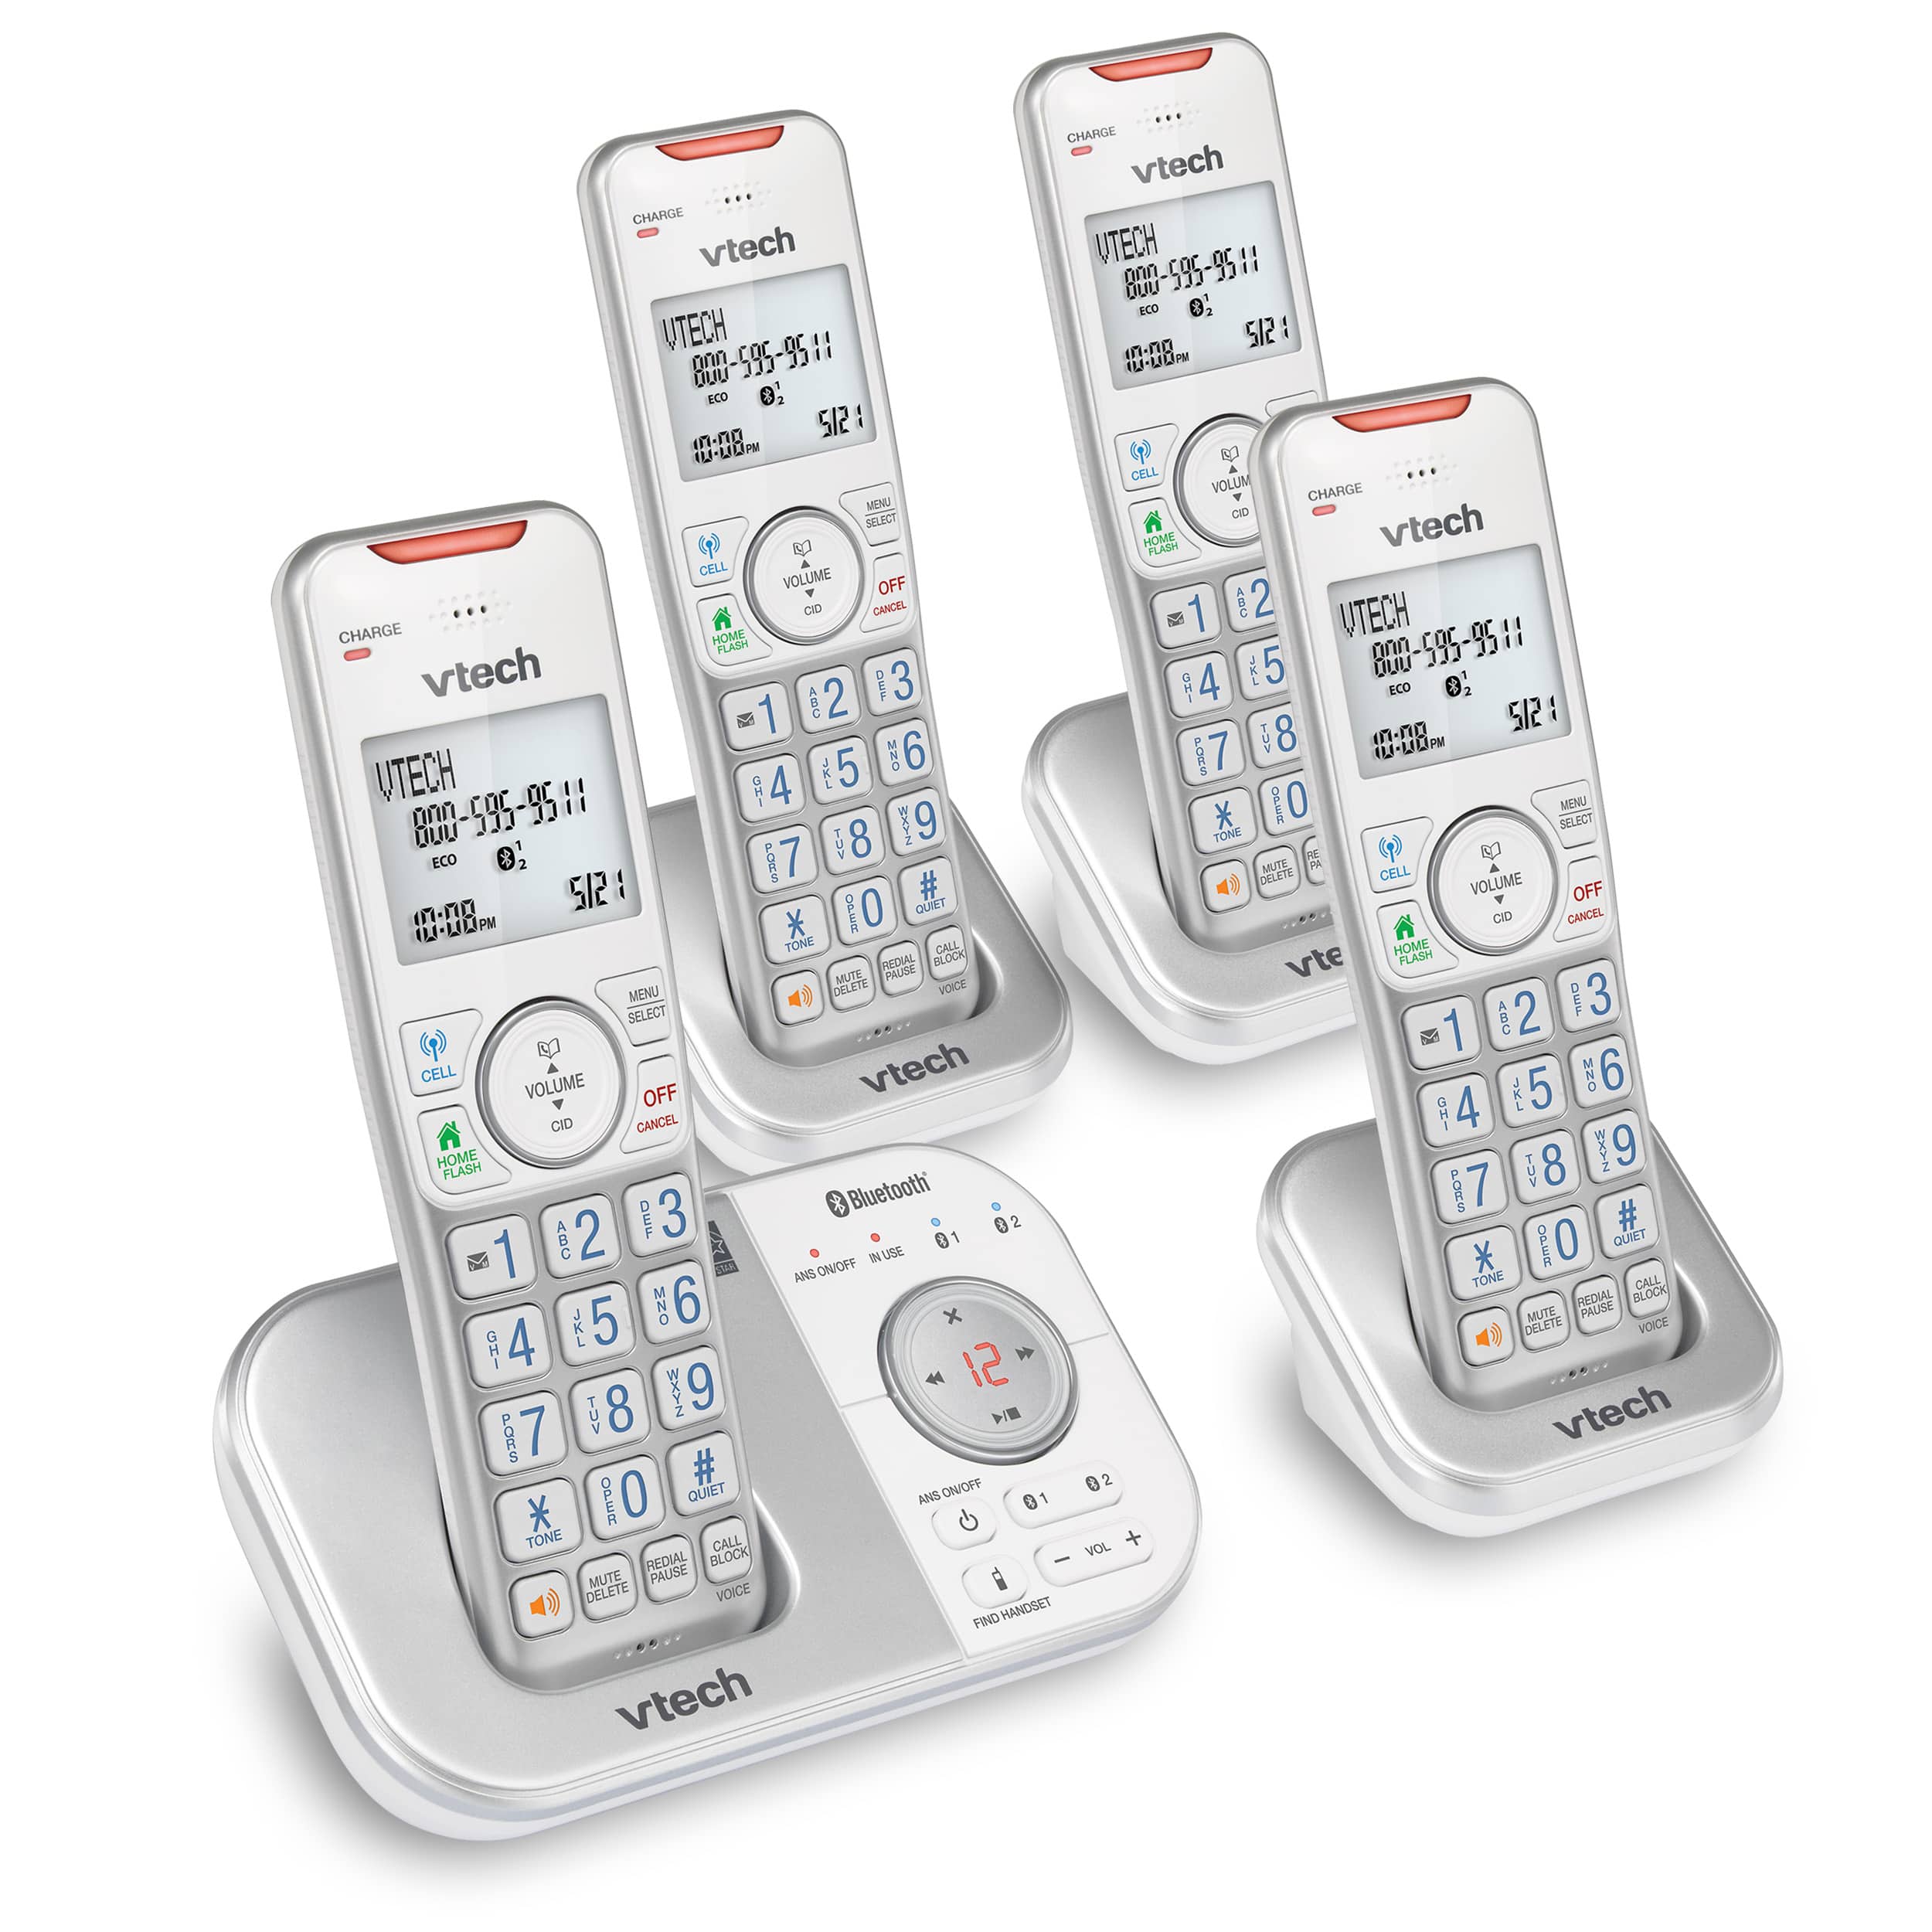 4-Handset Expandable Cordless Phone with Bluetooth Connect to Cell, Smart Call Blocker and Answering System (Silver & White)